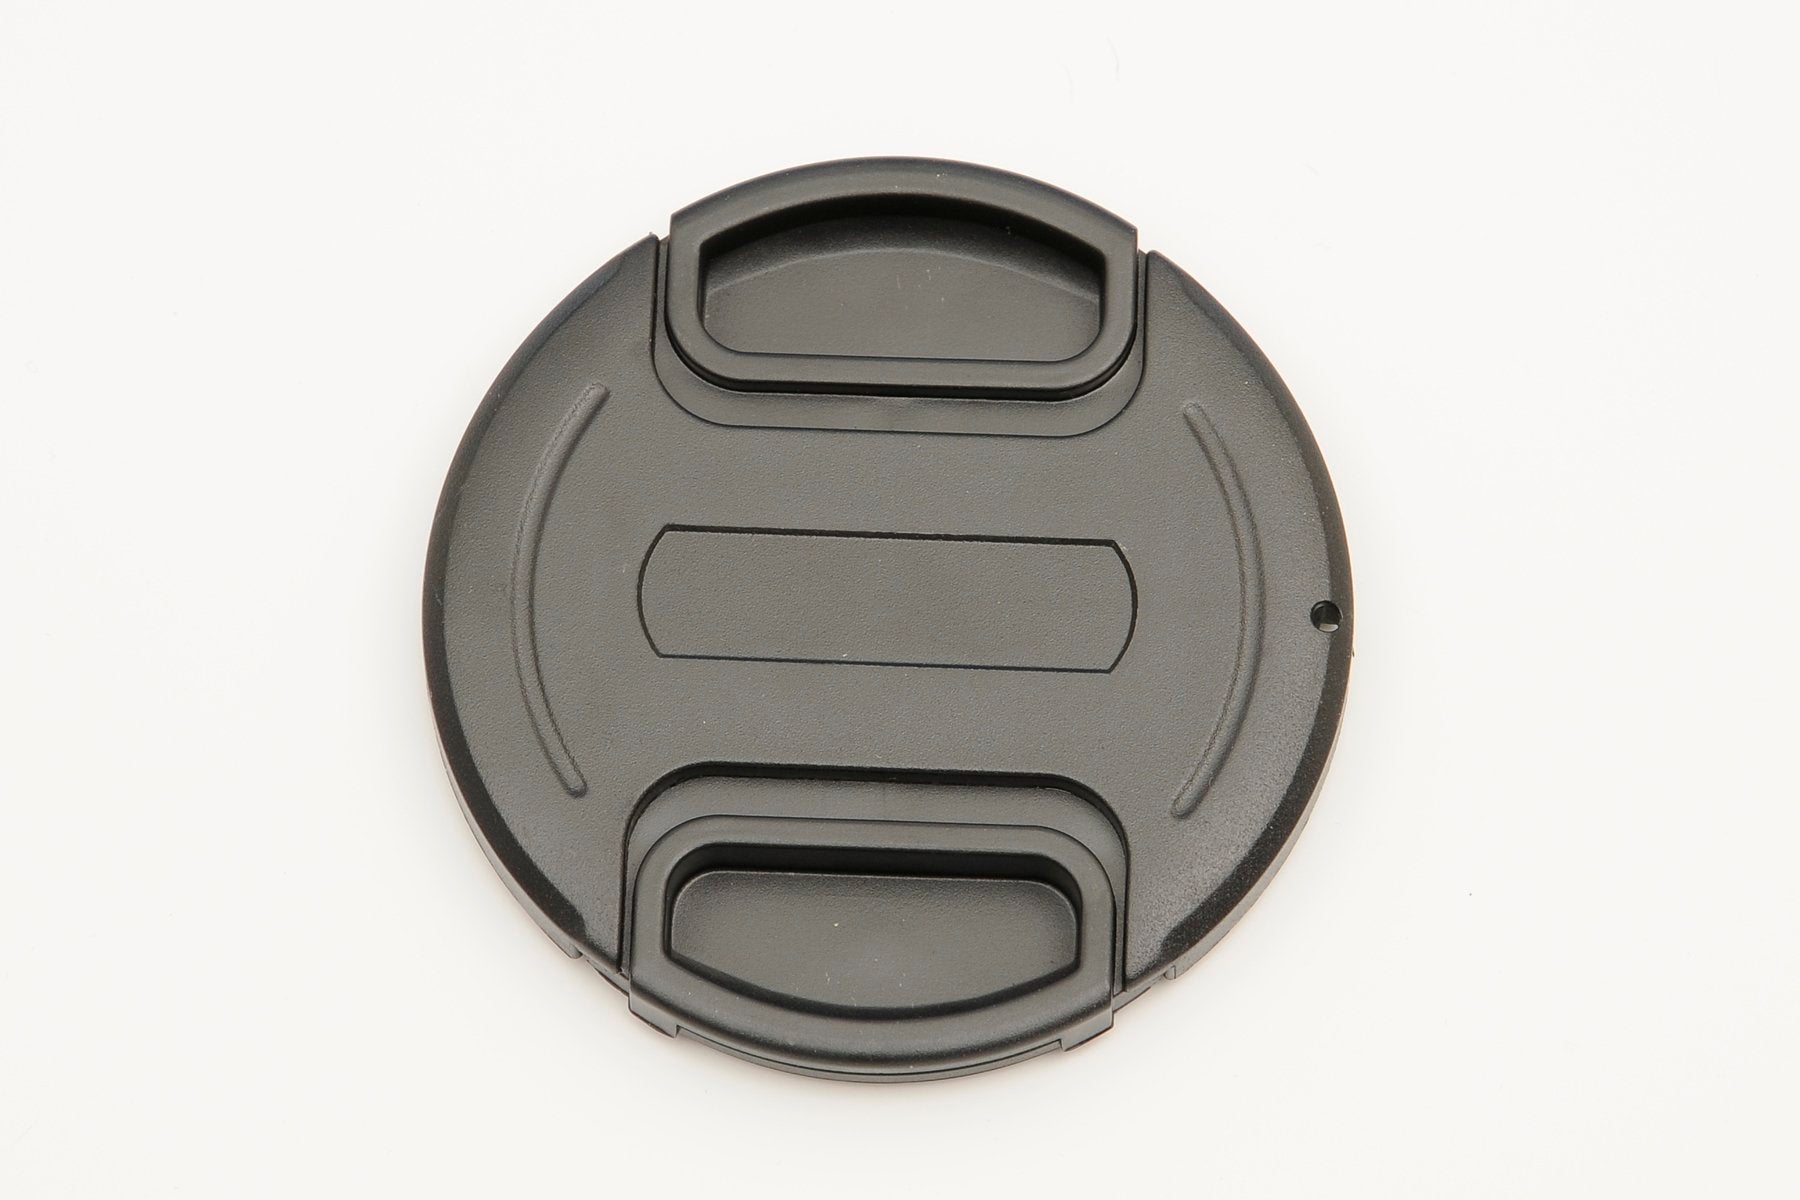 Snap on Lens Cap with Keeper Cord